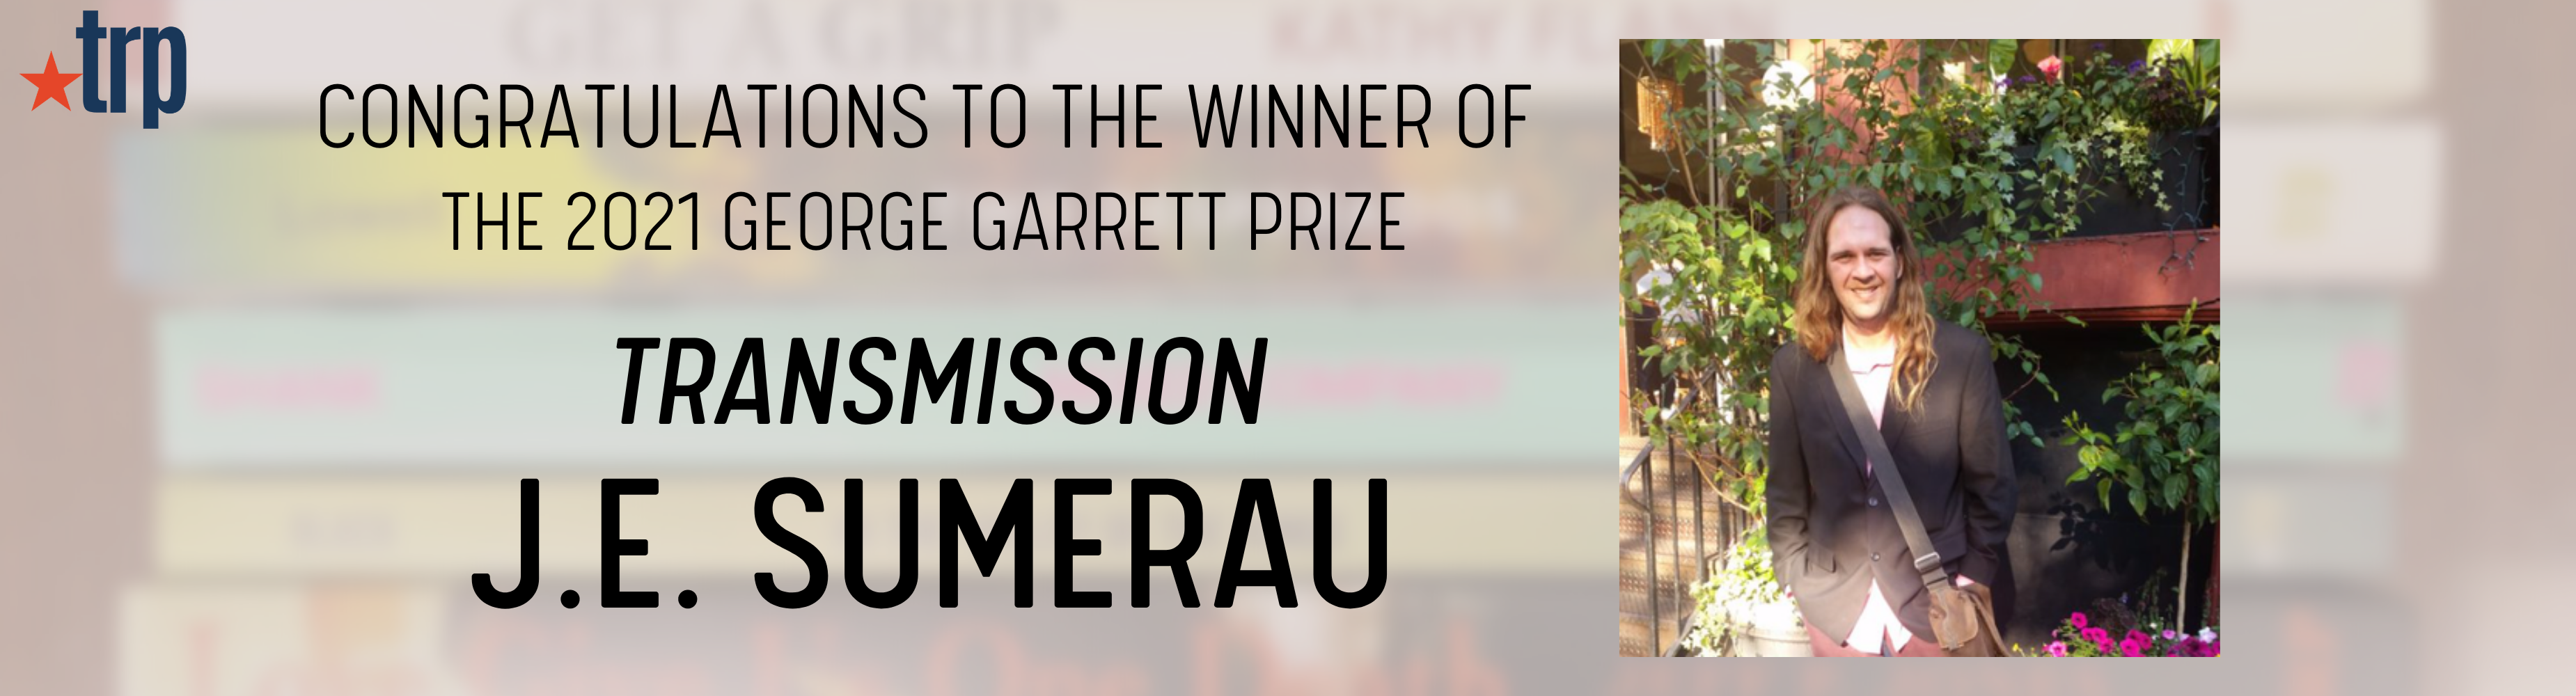 Congratulations to the Winner of the 2021 George Garrett Prize: 